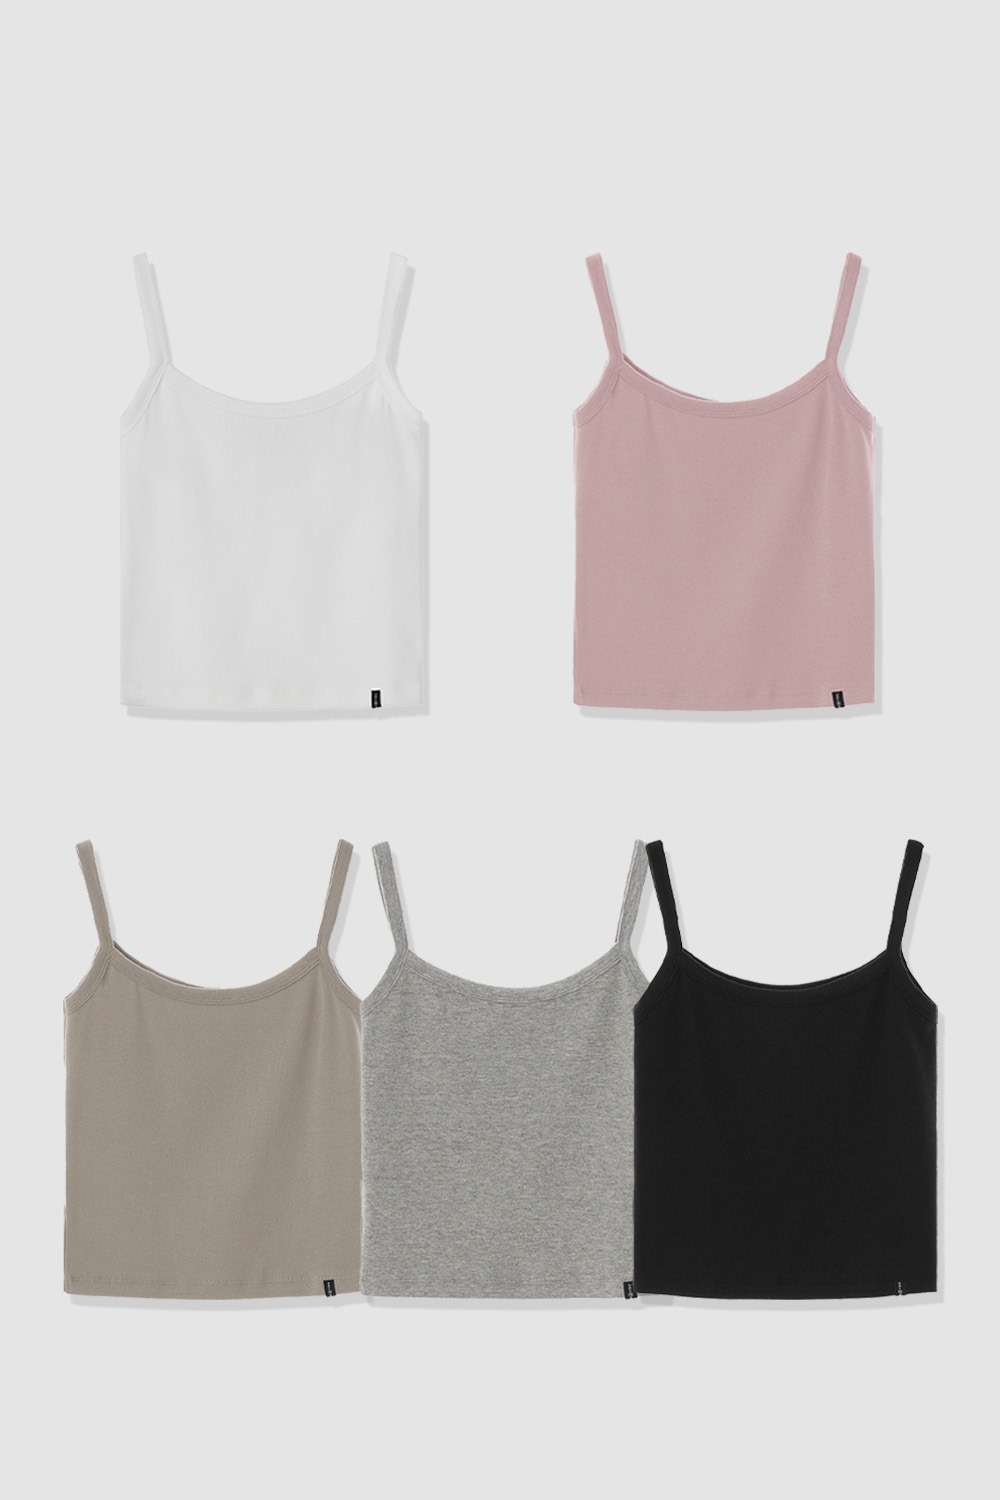 D. BASIC STRING SLEEVELESS TOP - 5 COLOR